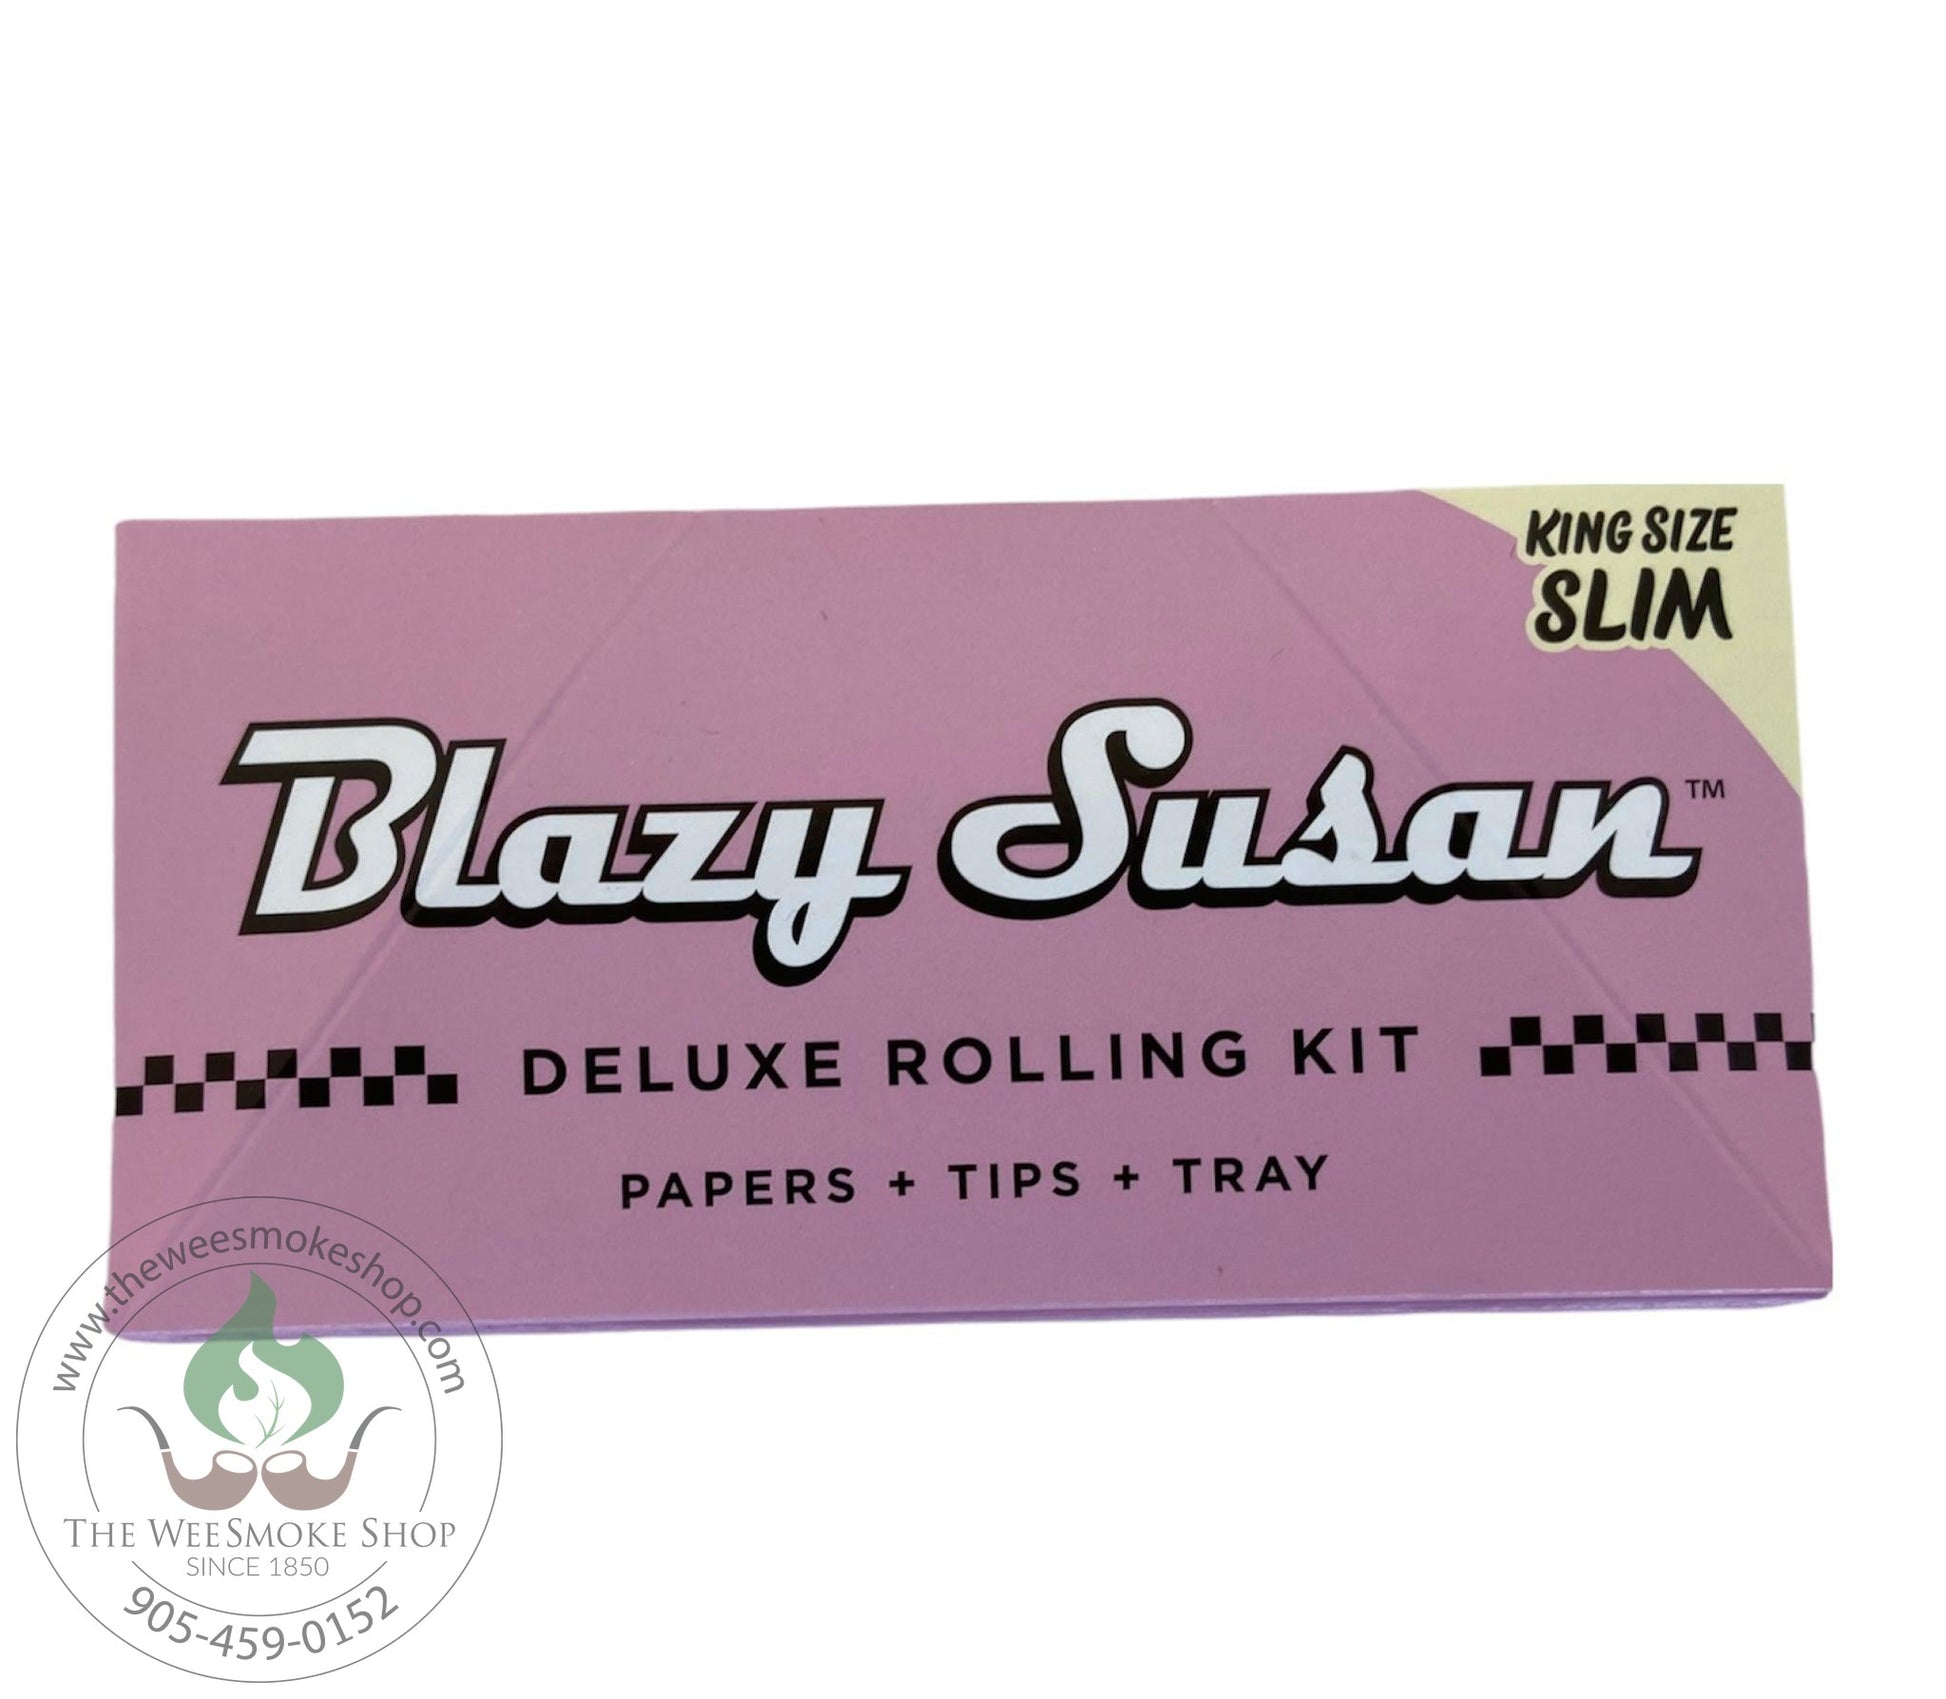 Blazy Susan Deluxe King Size Rolling Kit - rolling papers - the wee smoke shop